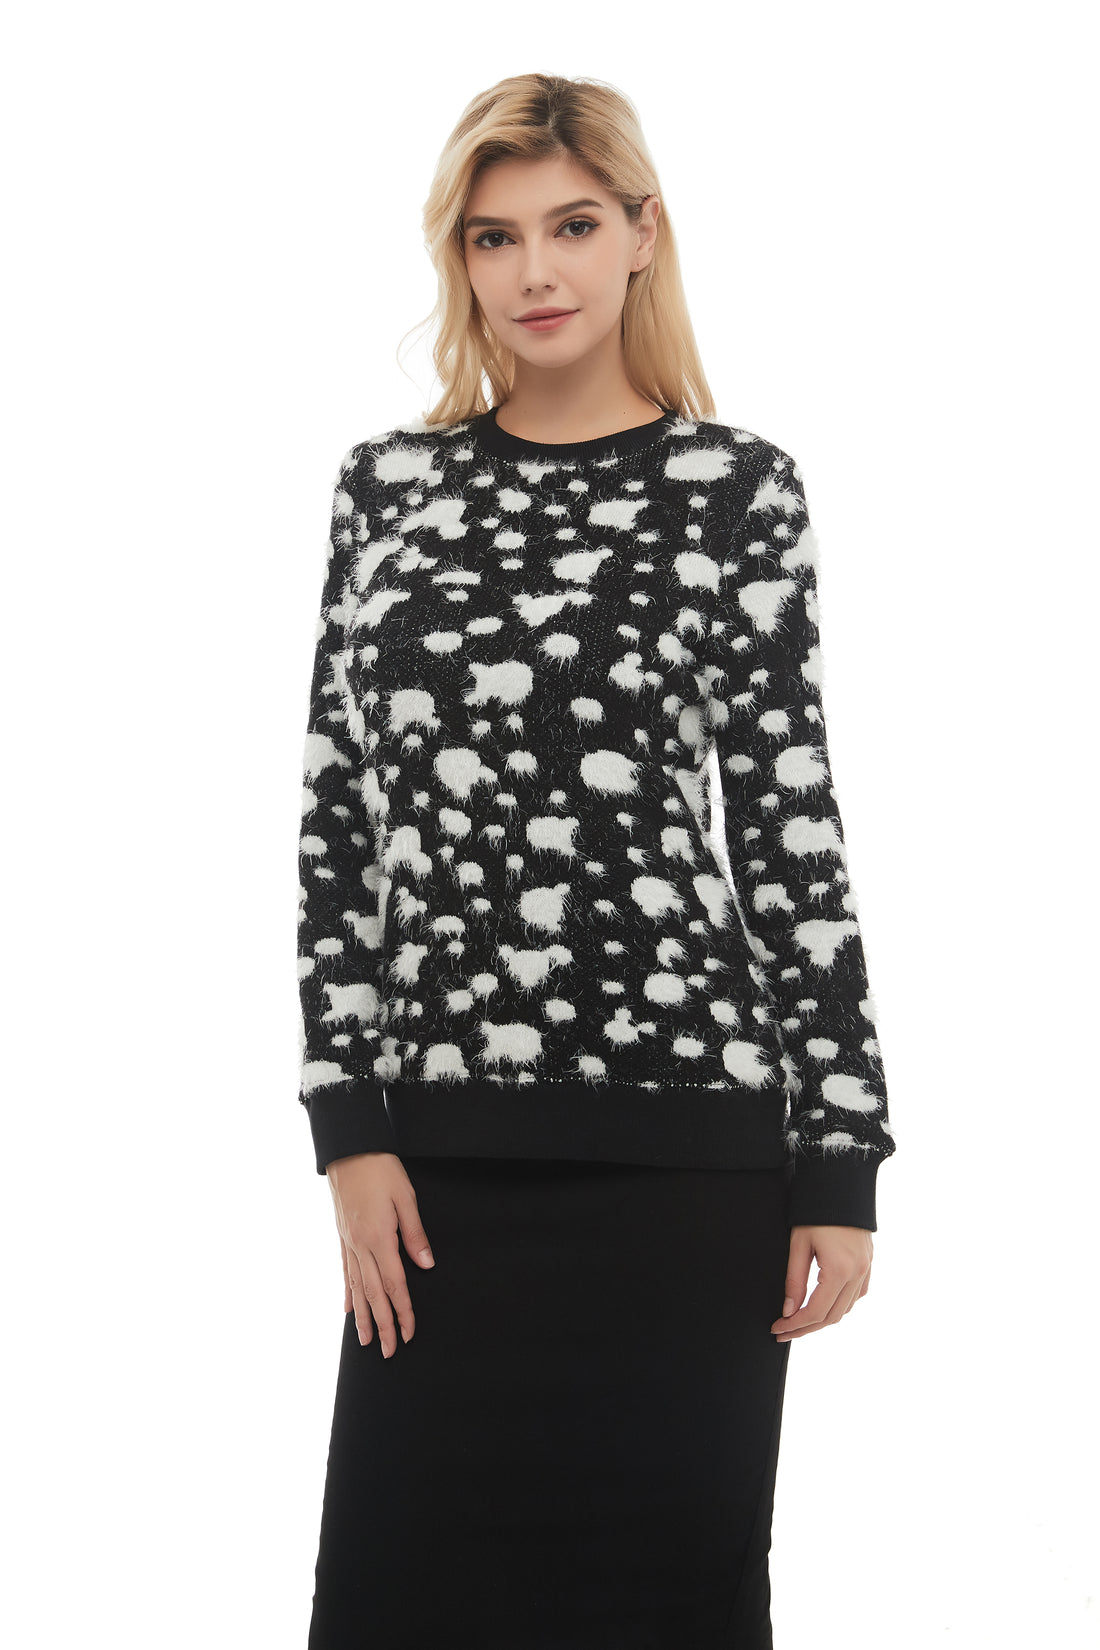 Long Sleeve Modest Mohair Black & White Sweater Top - figaliciousfood